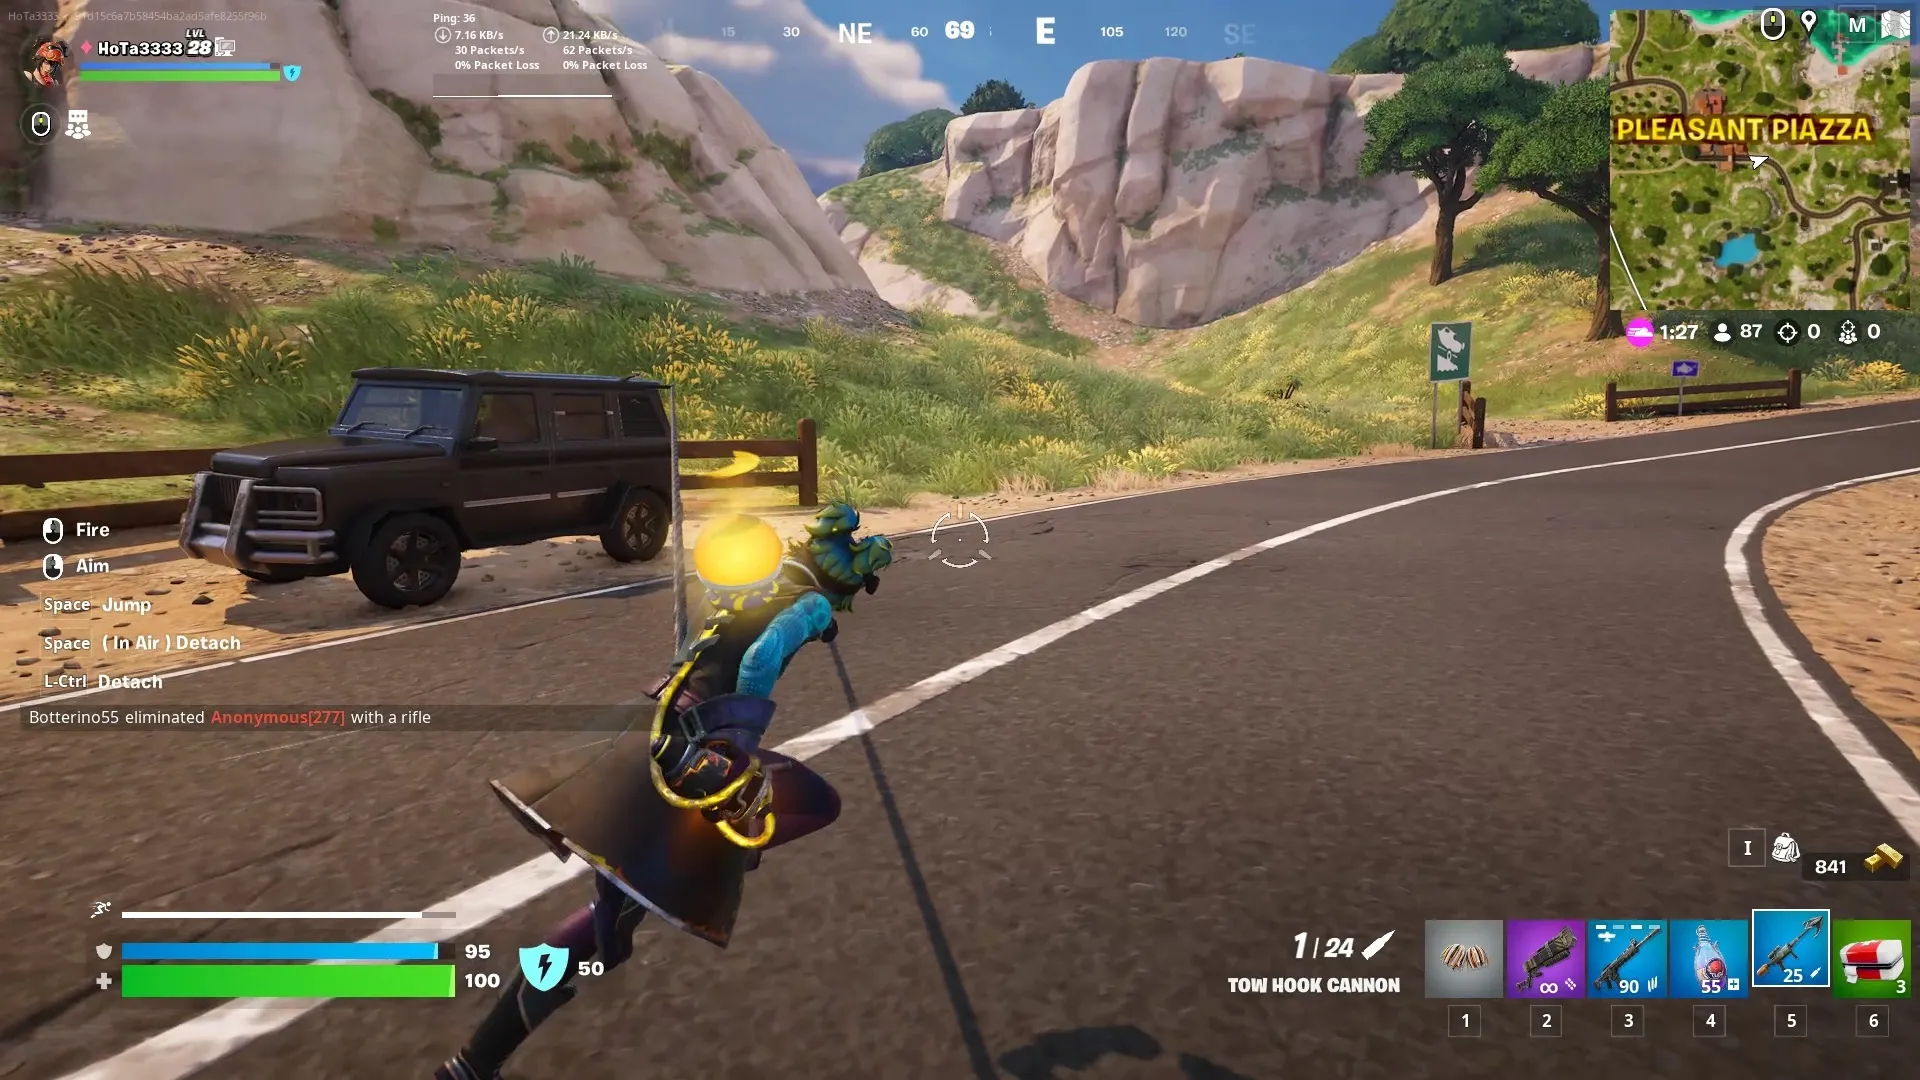 How to Travel Distance While Attached to a Vehicle With a Tow Hook Cannon in Fortnite